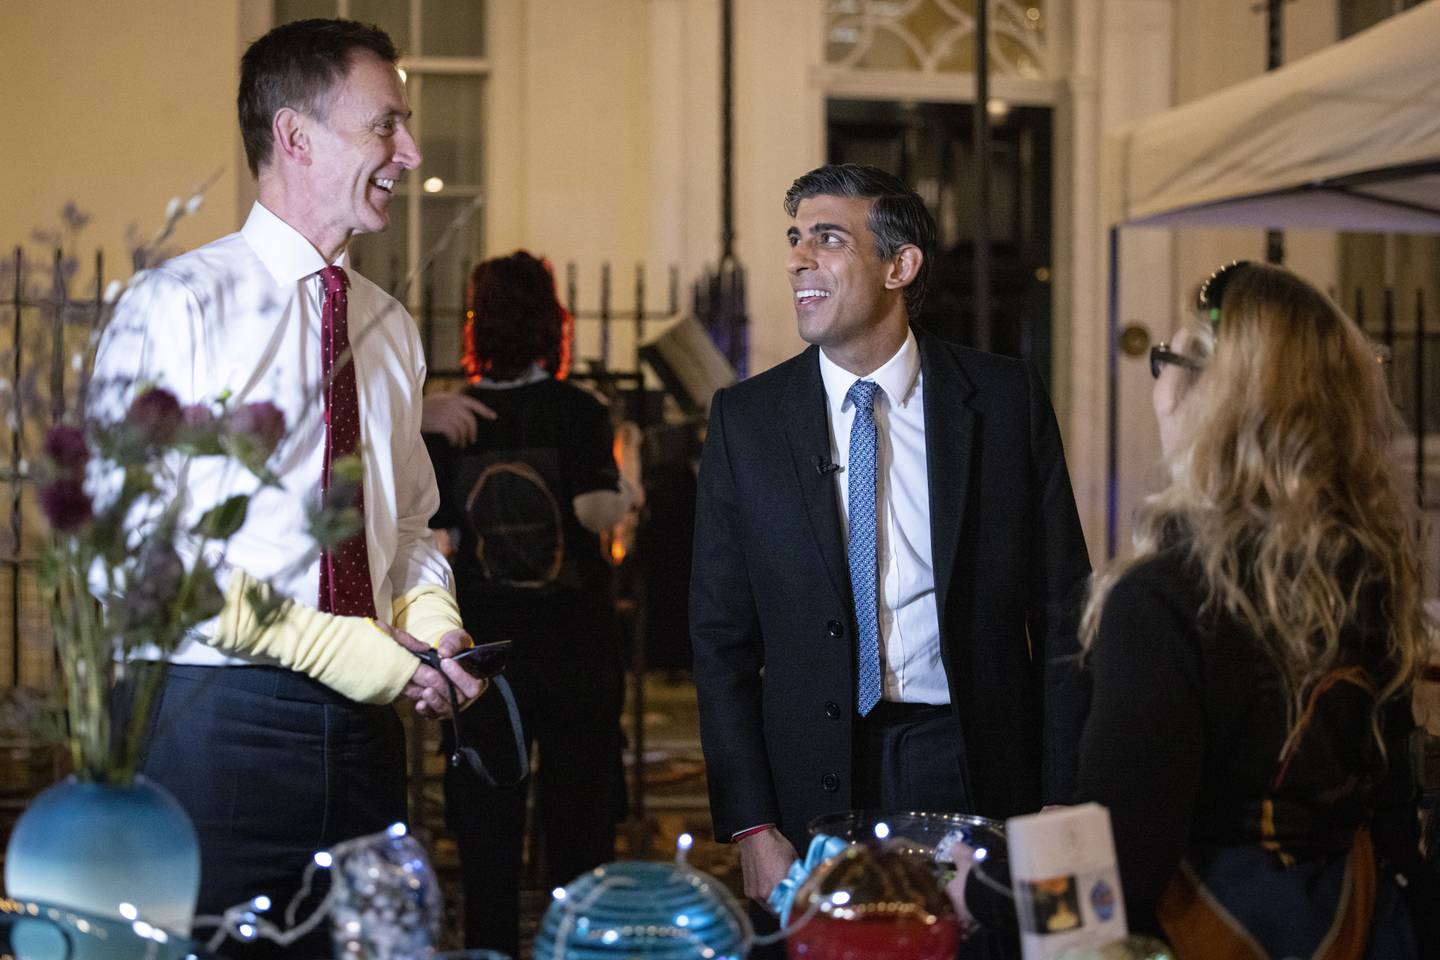 British Prime Minister Rishi Sunak chats with British Chancellor of Exchequer Jeremy Hunt (left) as they meet business owners at a Christmas market in Downing Street in London. EPA